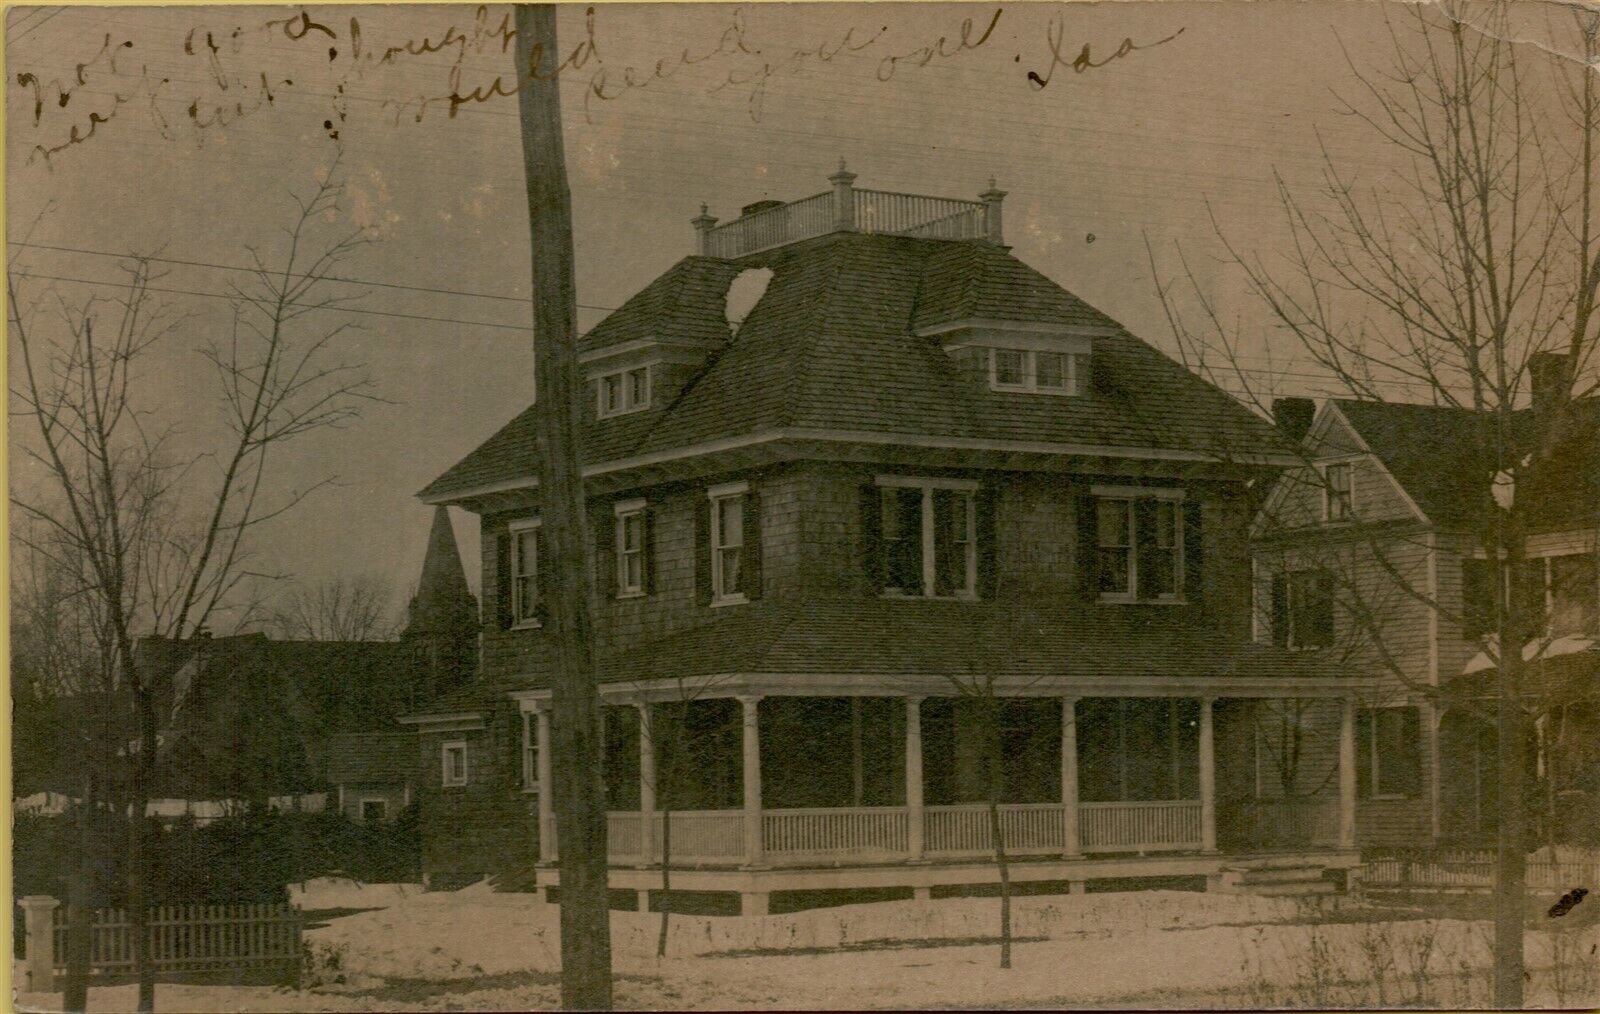 1905 Exterior Street View Residence House in Winter RPPC Real Photo Postcard D45